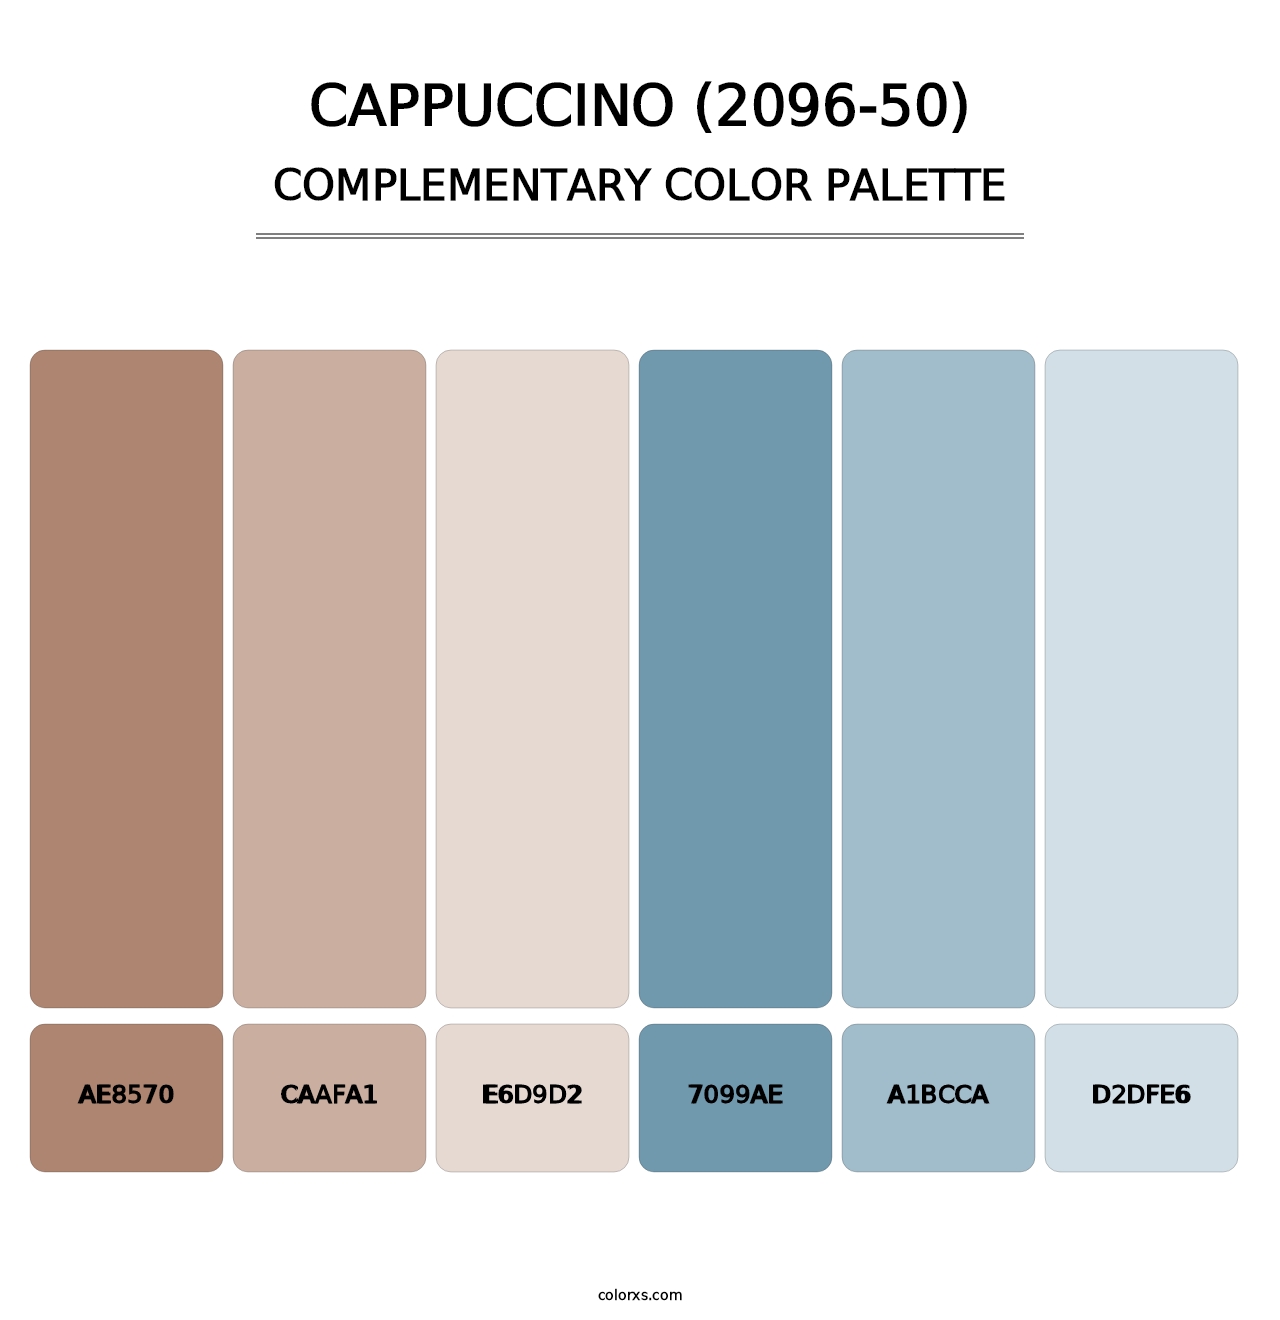 Cappuccino (2096-50) - Complementary Color Palette